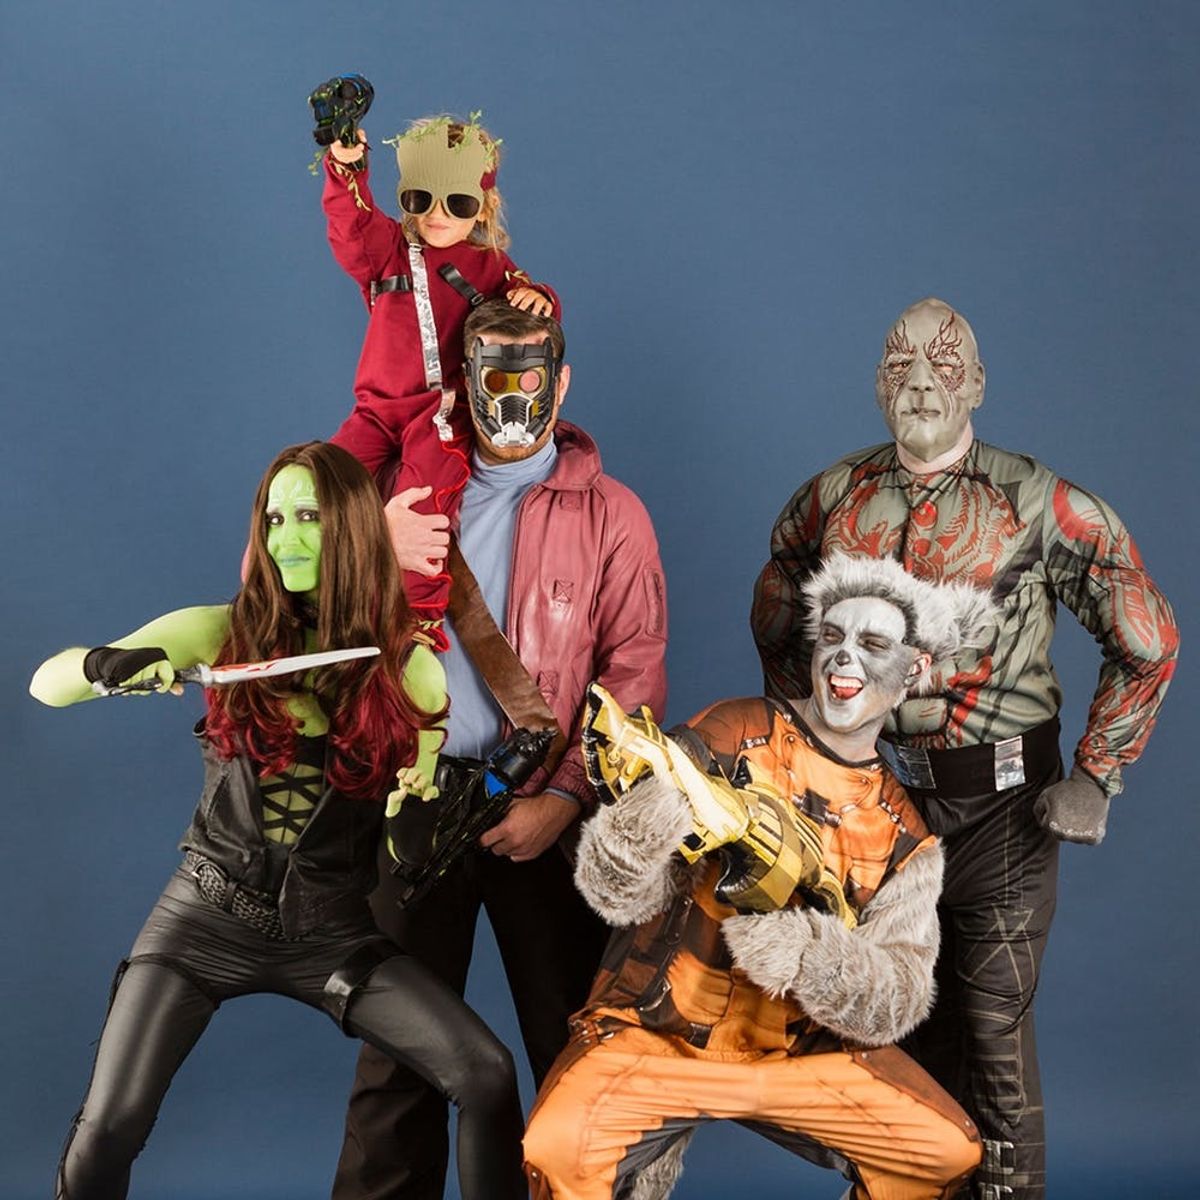 Our Guardians of the Galaxy Group Costume Is Out-of-This-World